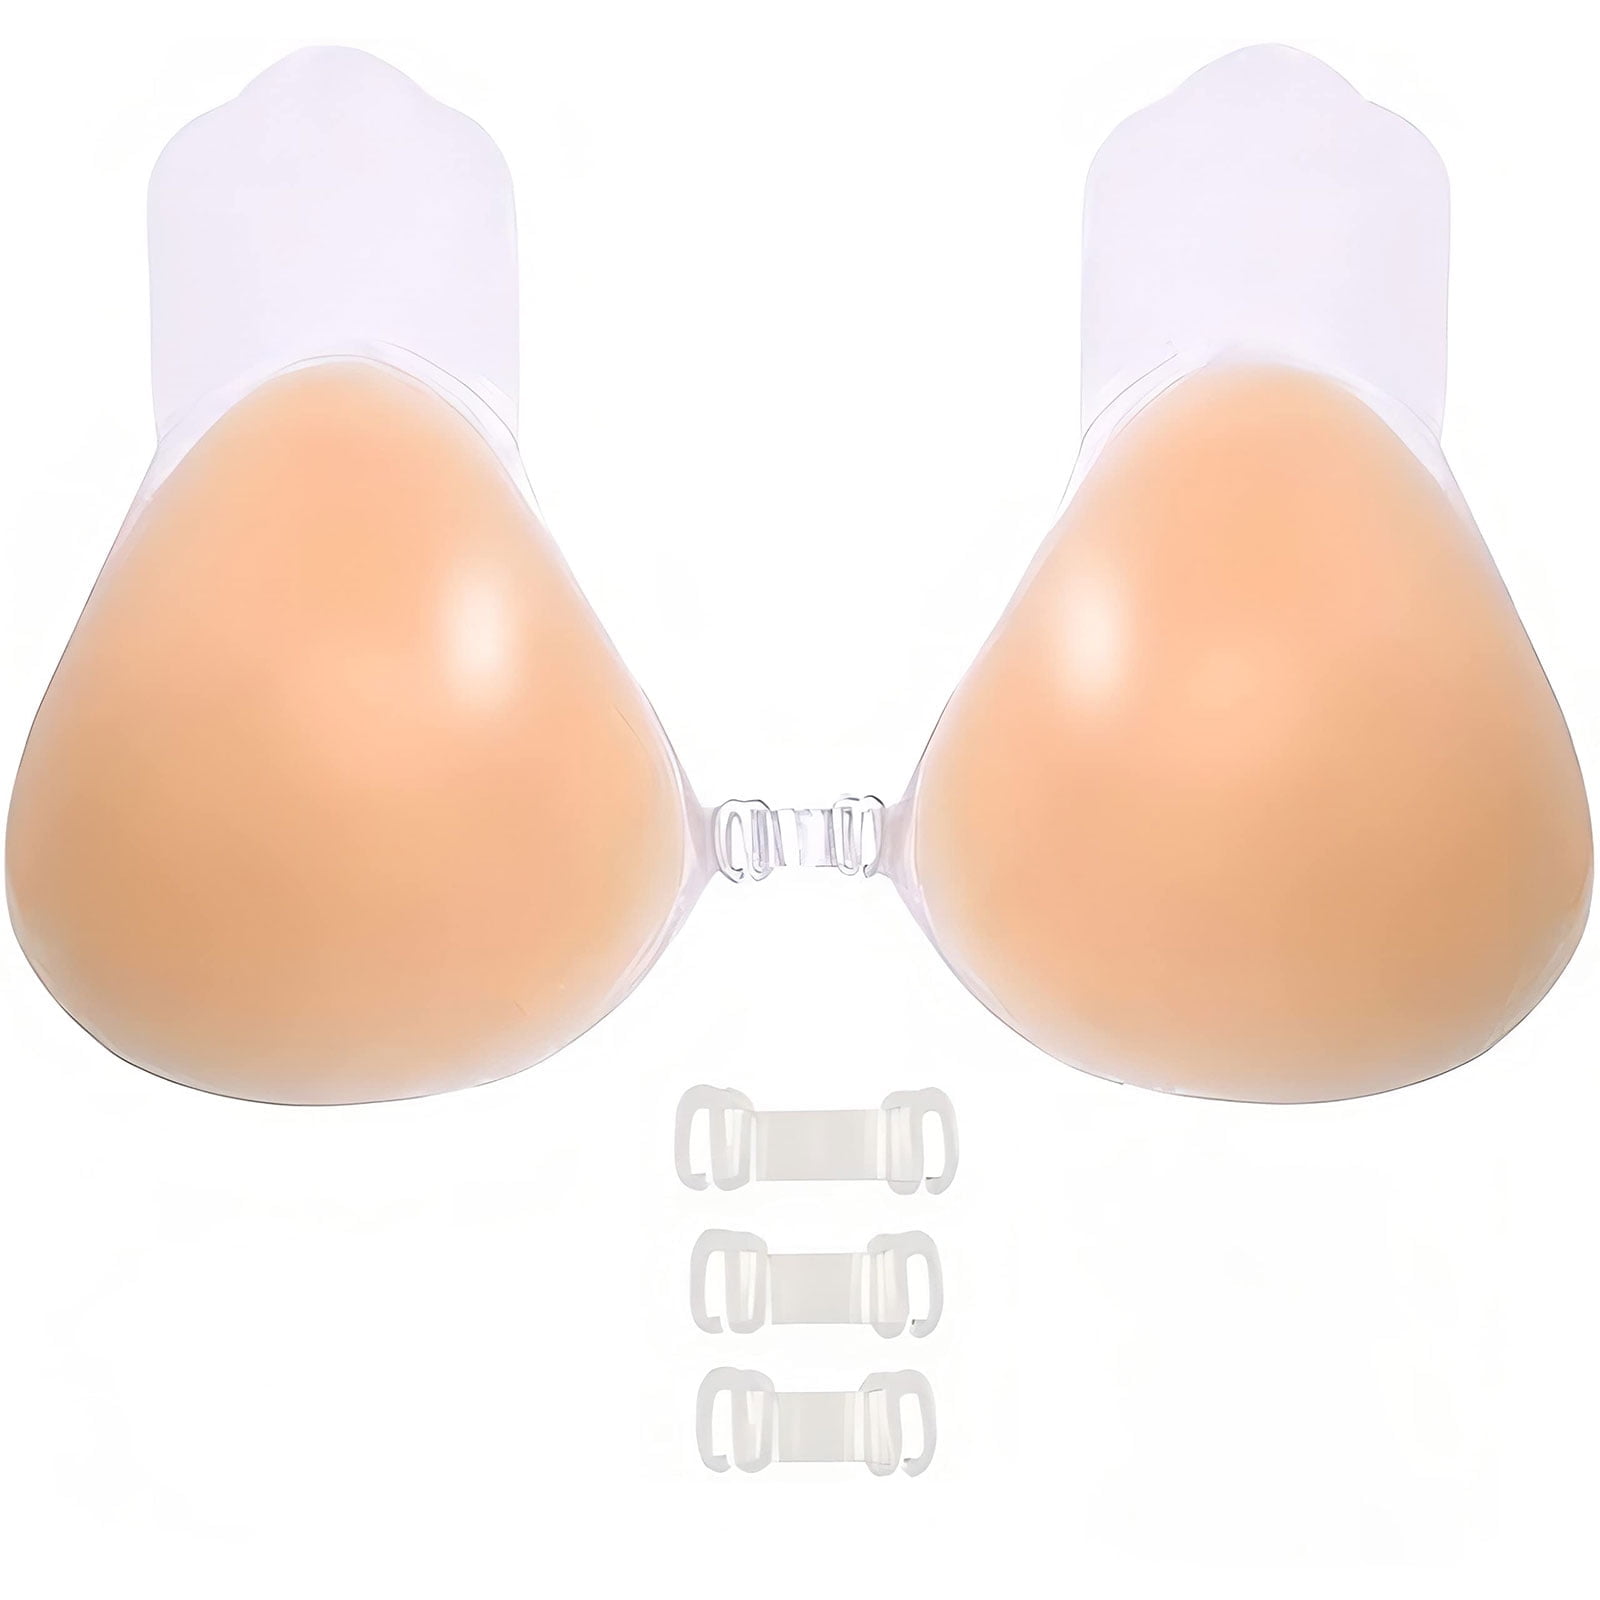 SUREMATE Sticky Bra Strapless Backless Adhesive Bra for Women